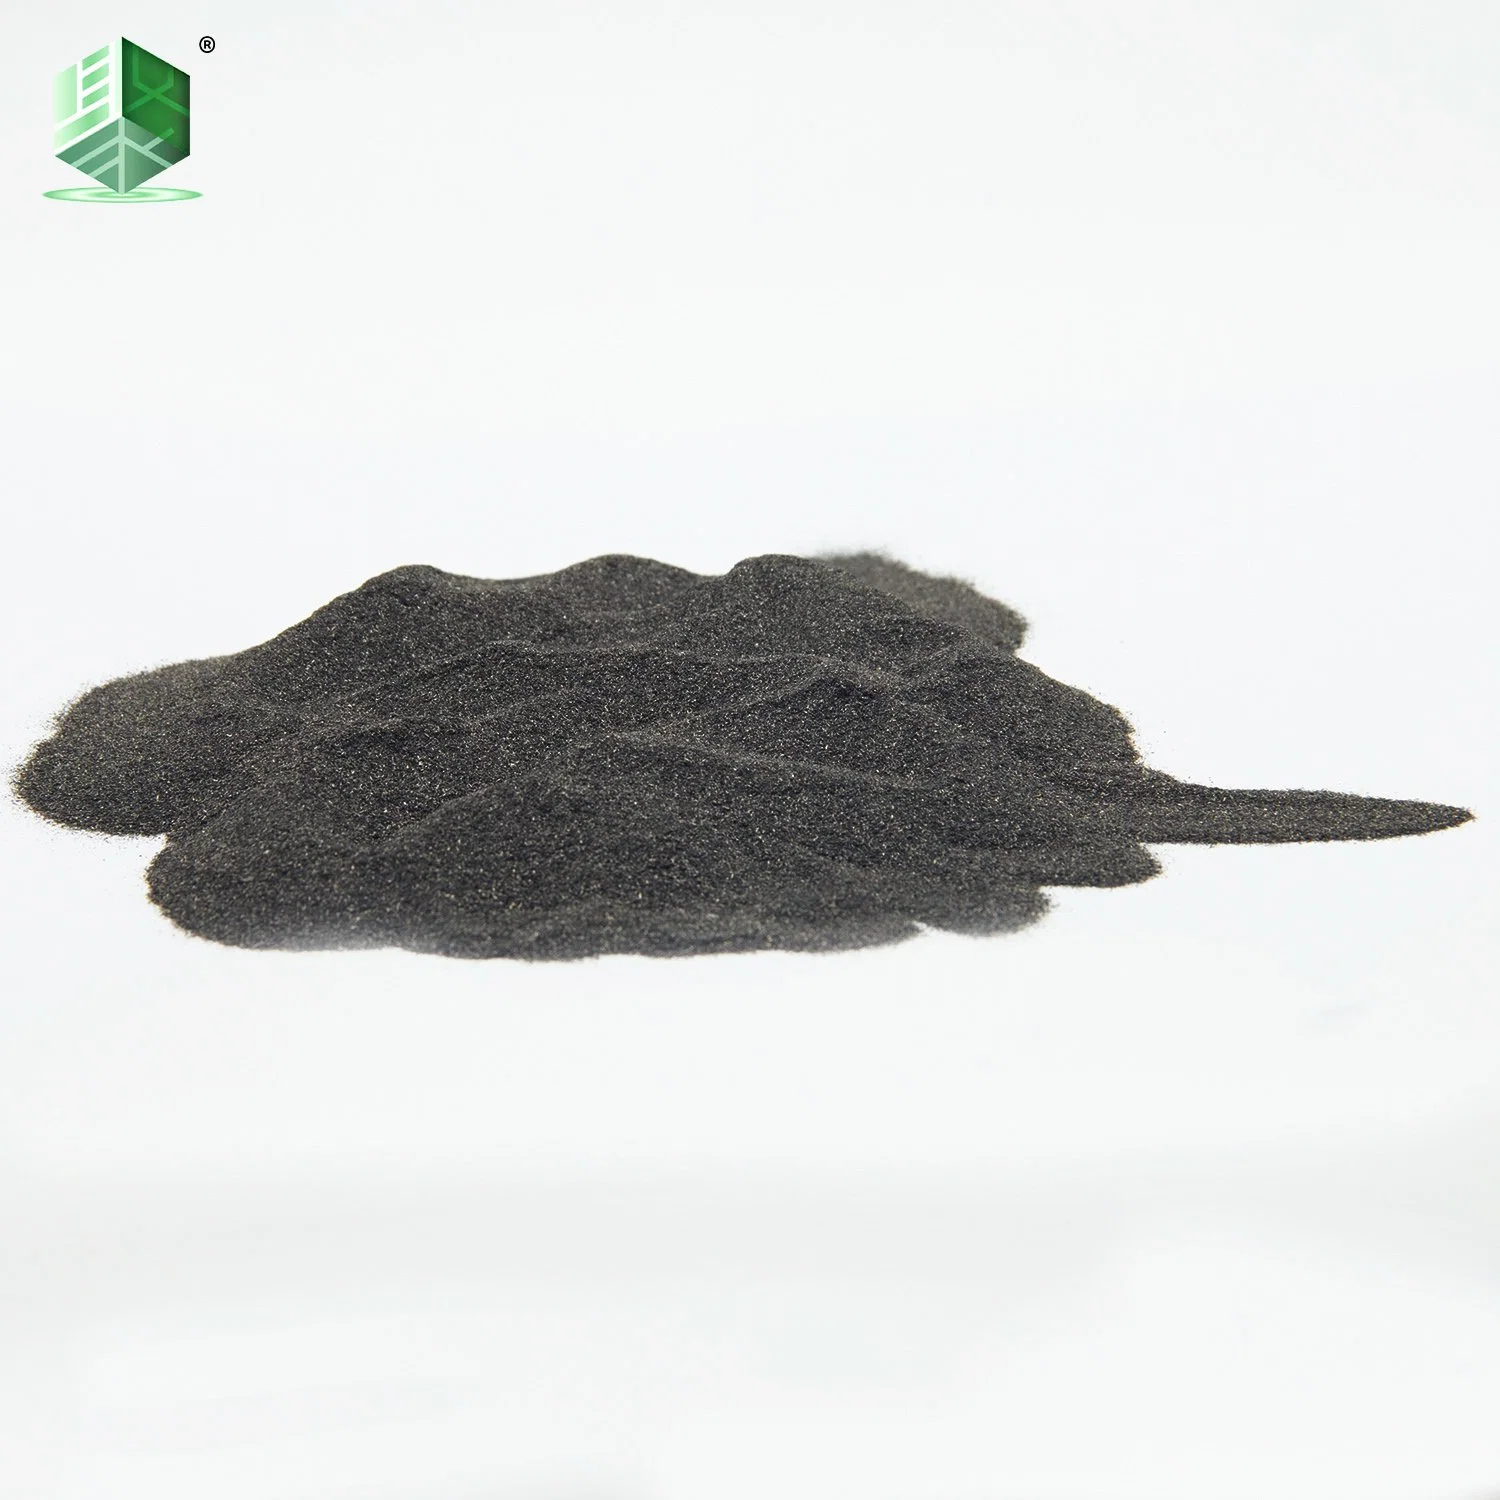 High quality/High cost performance  Coarse-Grained Tungsten Powder with Excellent Fluidity